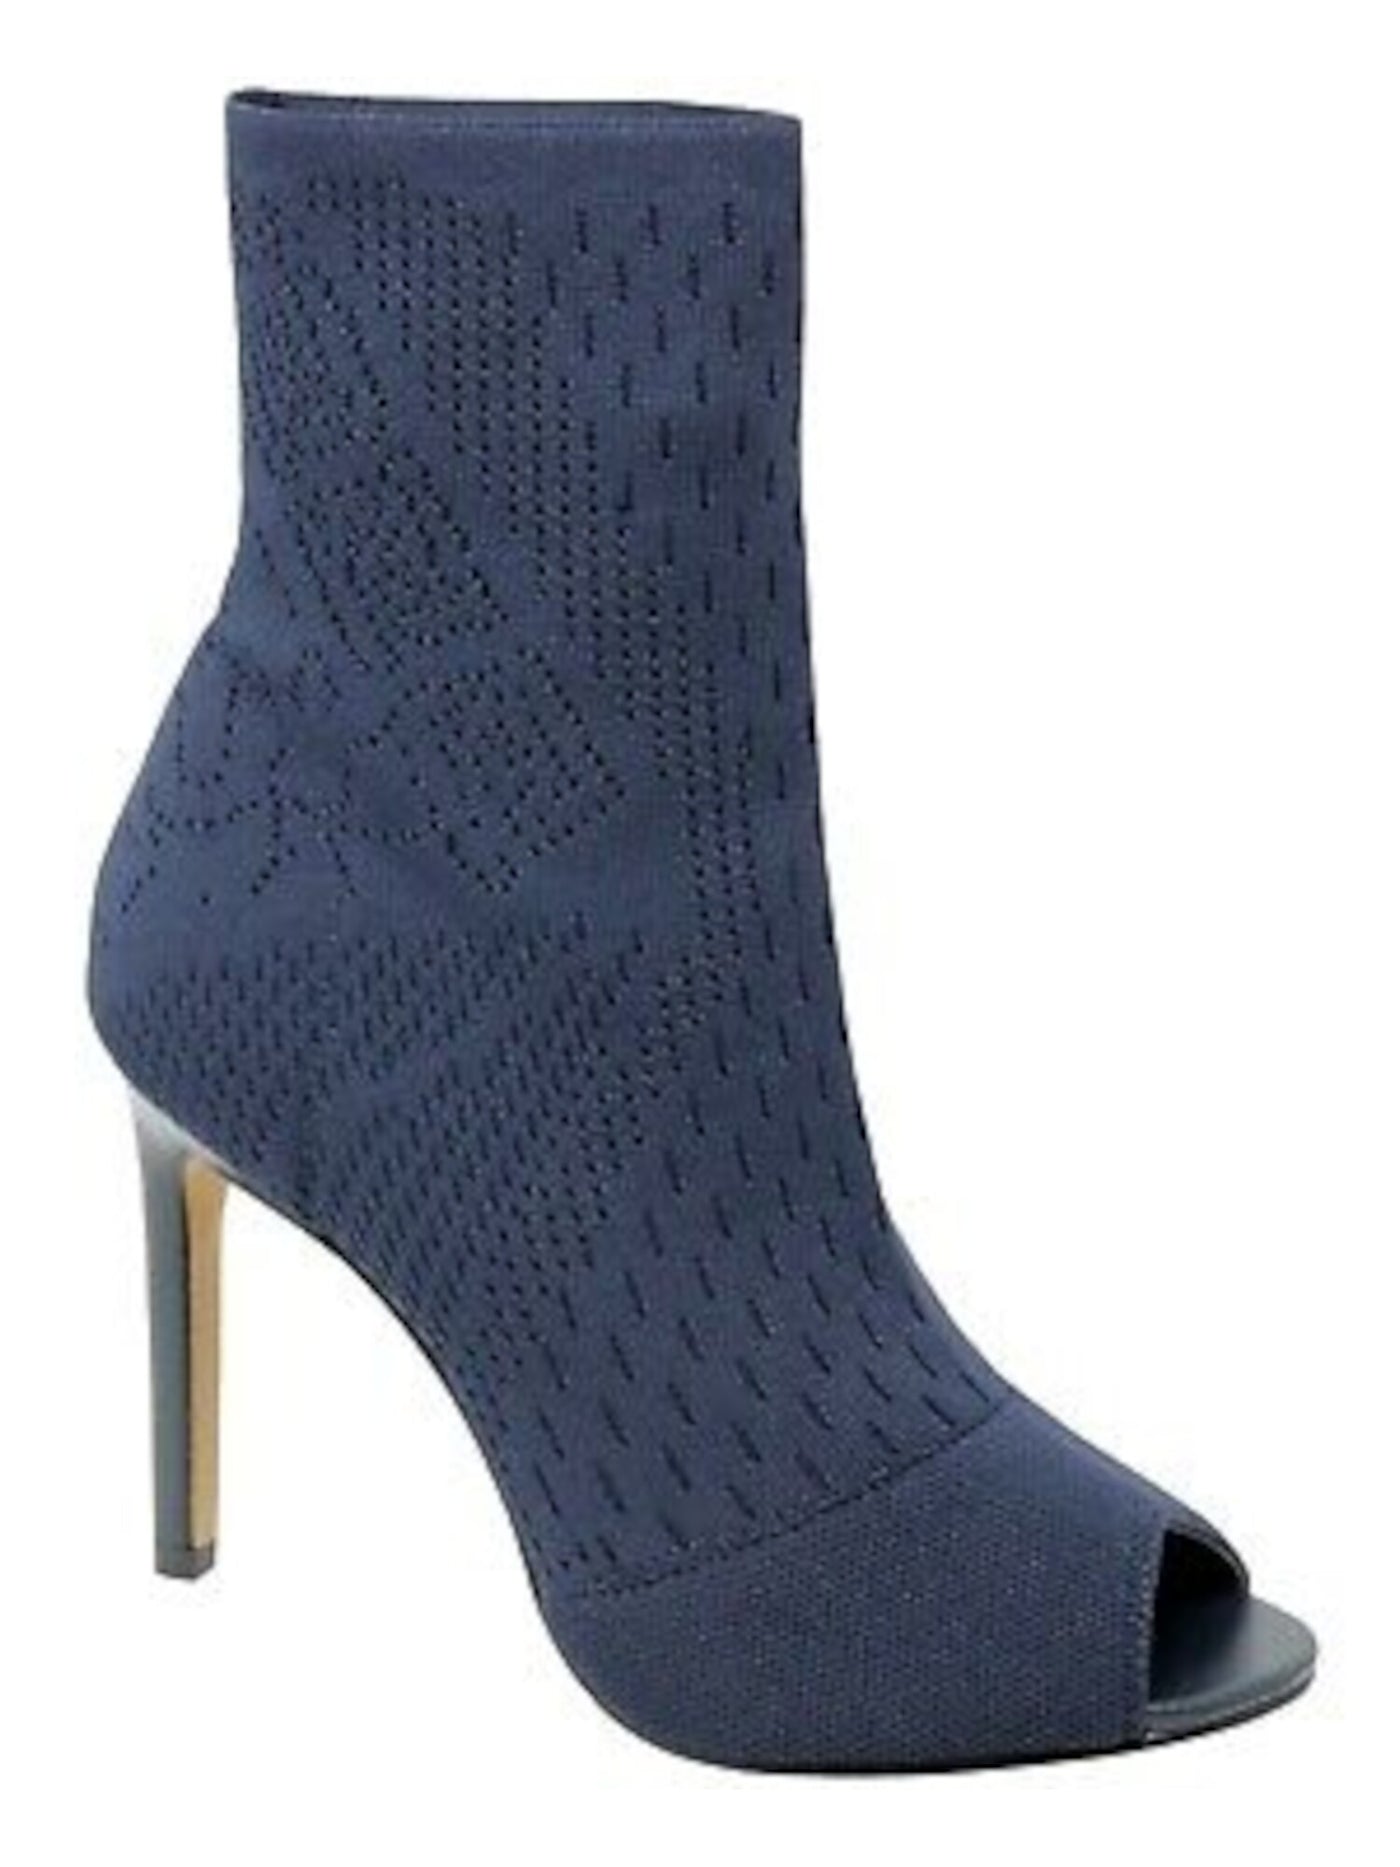 CHARLES BY CHARLES DAVID Womens Navy Knit Perforated Stretch Padded Inspector Peep Toe Stiletto Dress Shootie 5.5 M